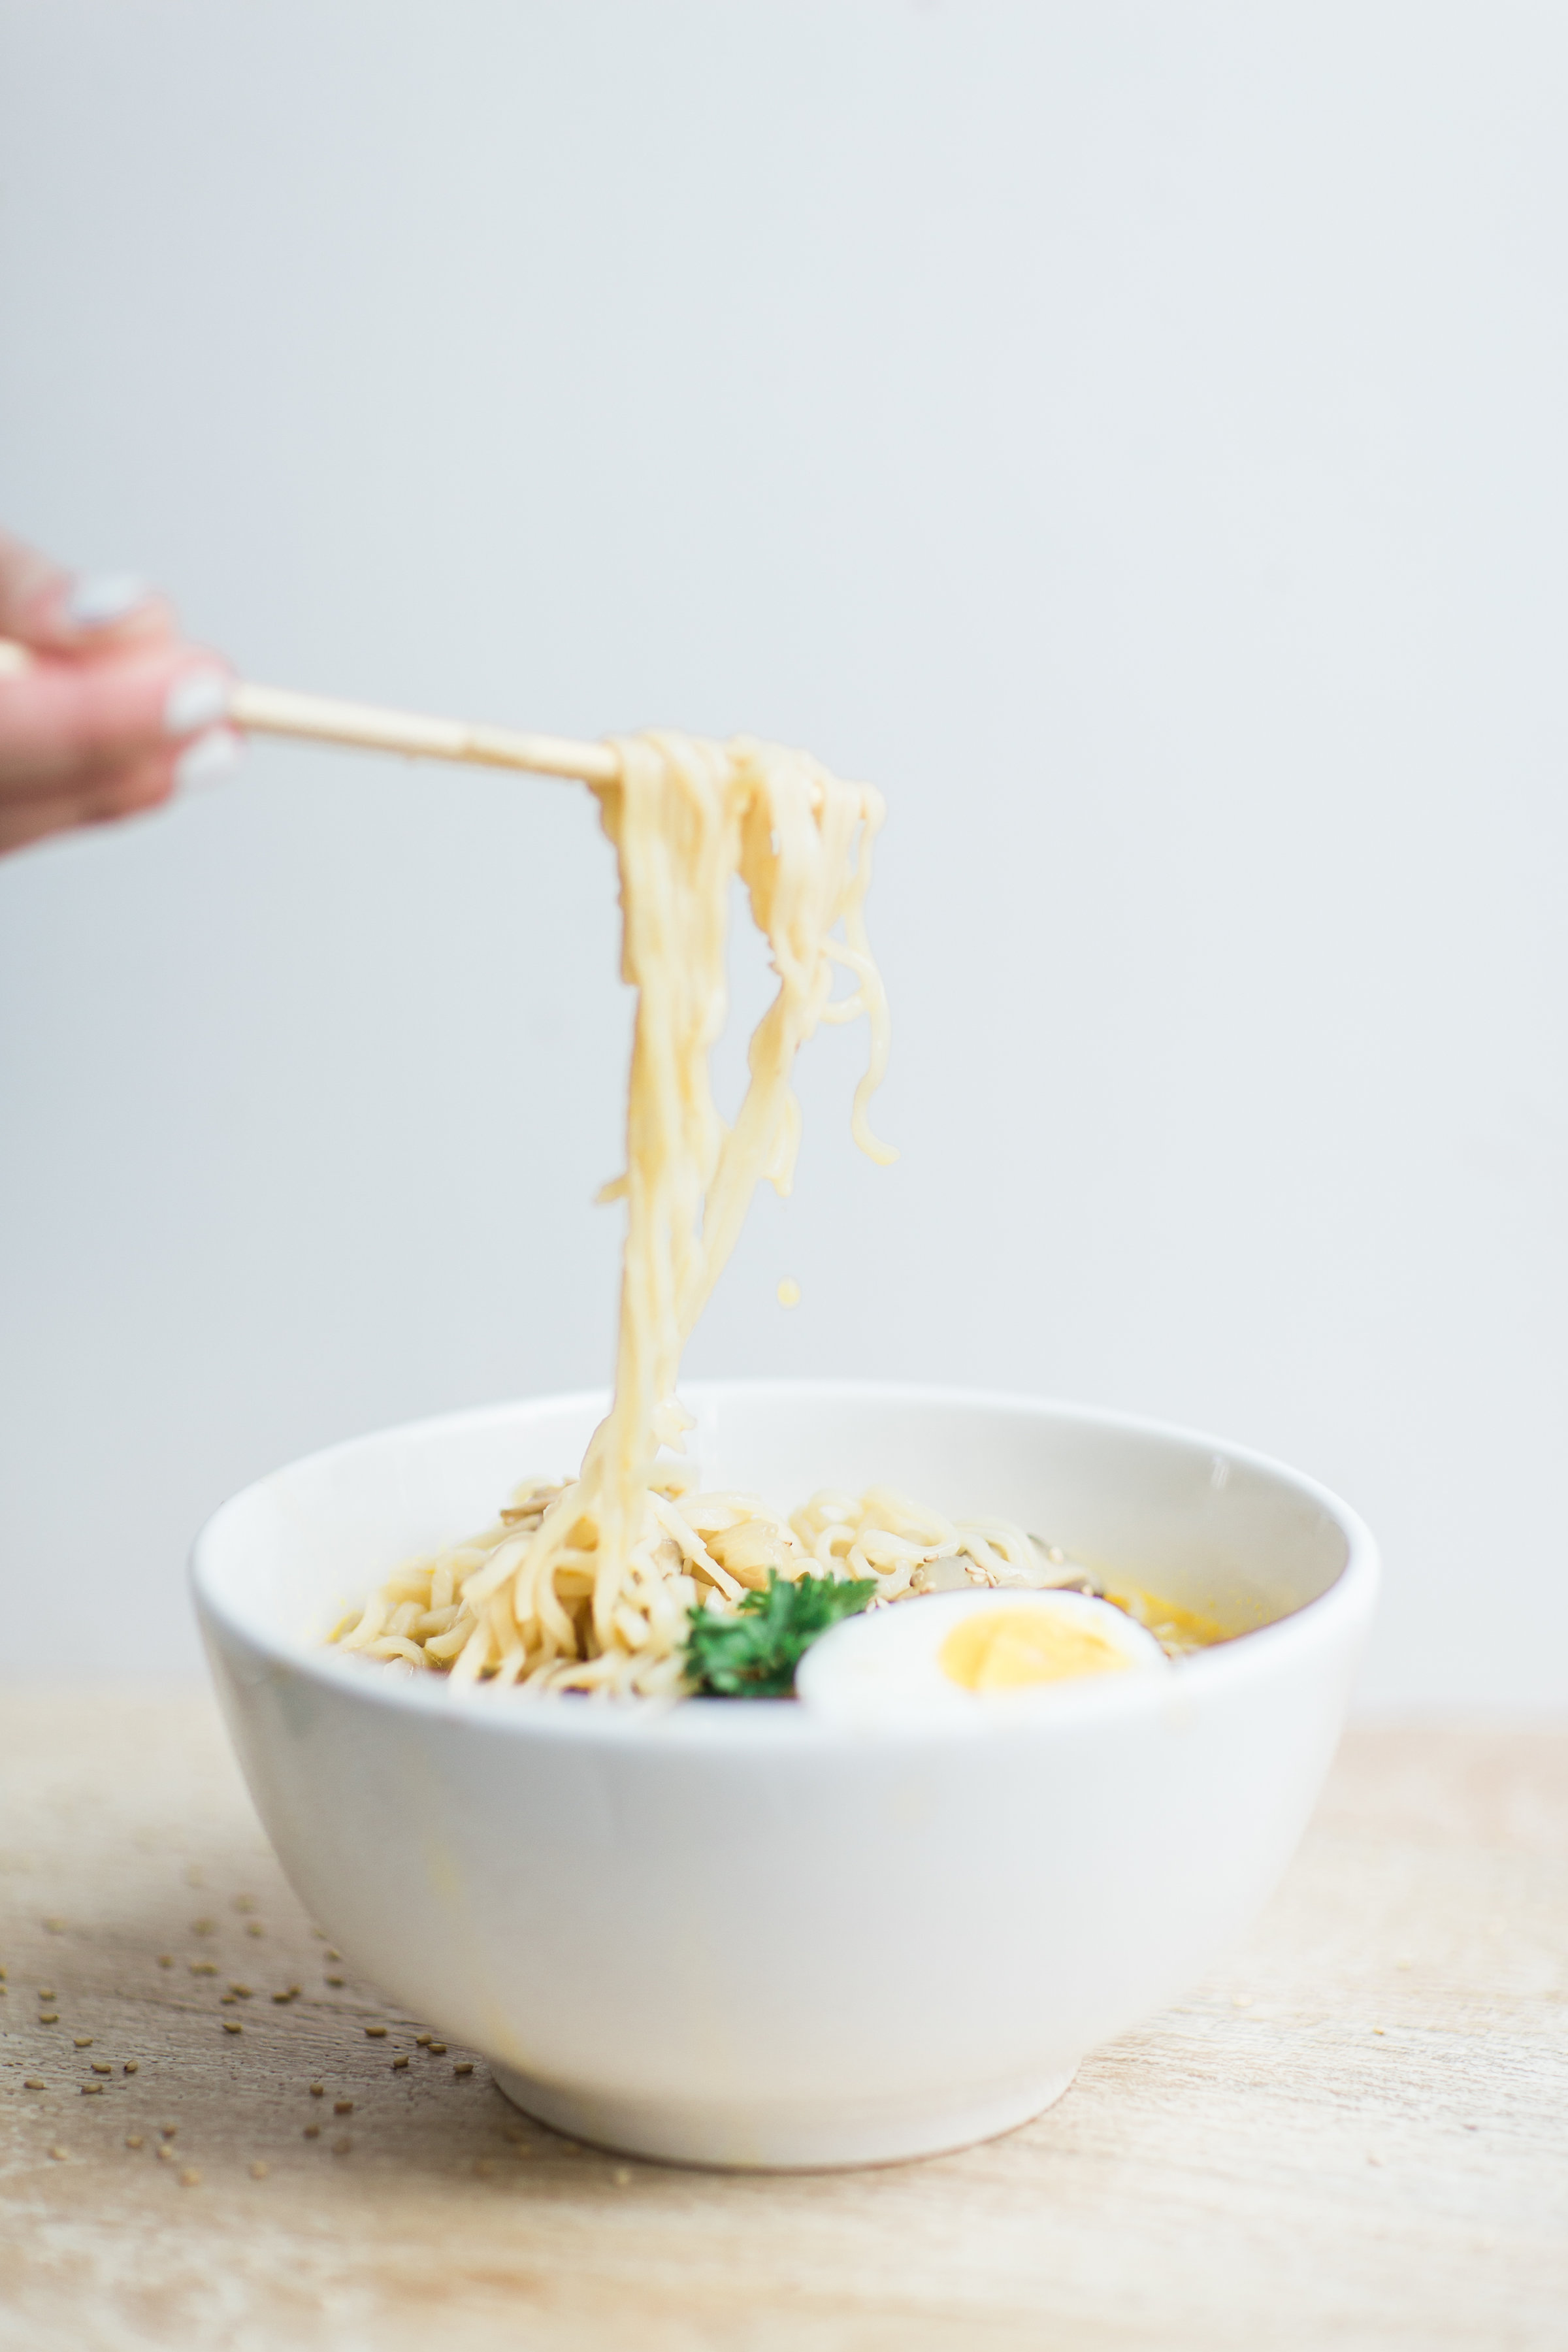 Simple Ramen Noodles Recipe in Under 15 Minutes by lifestyle blogger Lexi of Glitter, Inc.